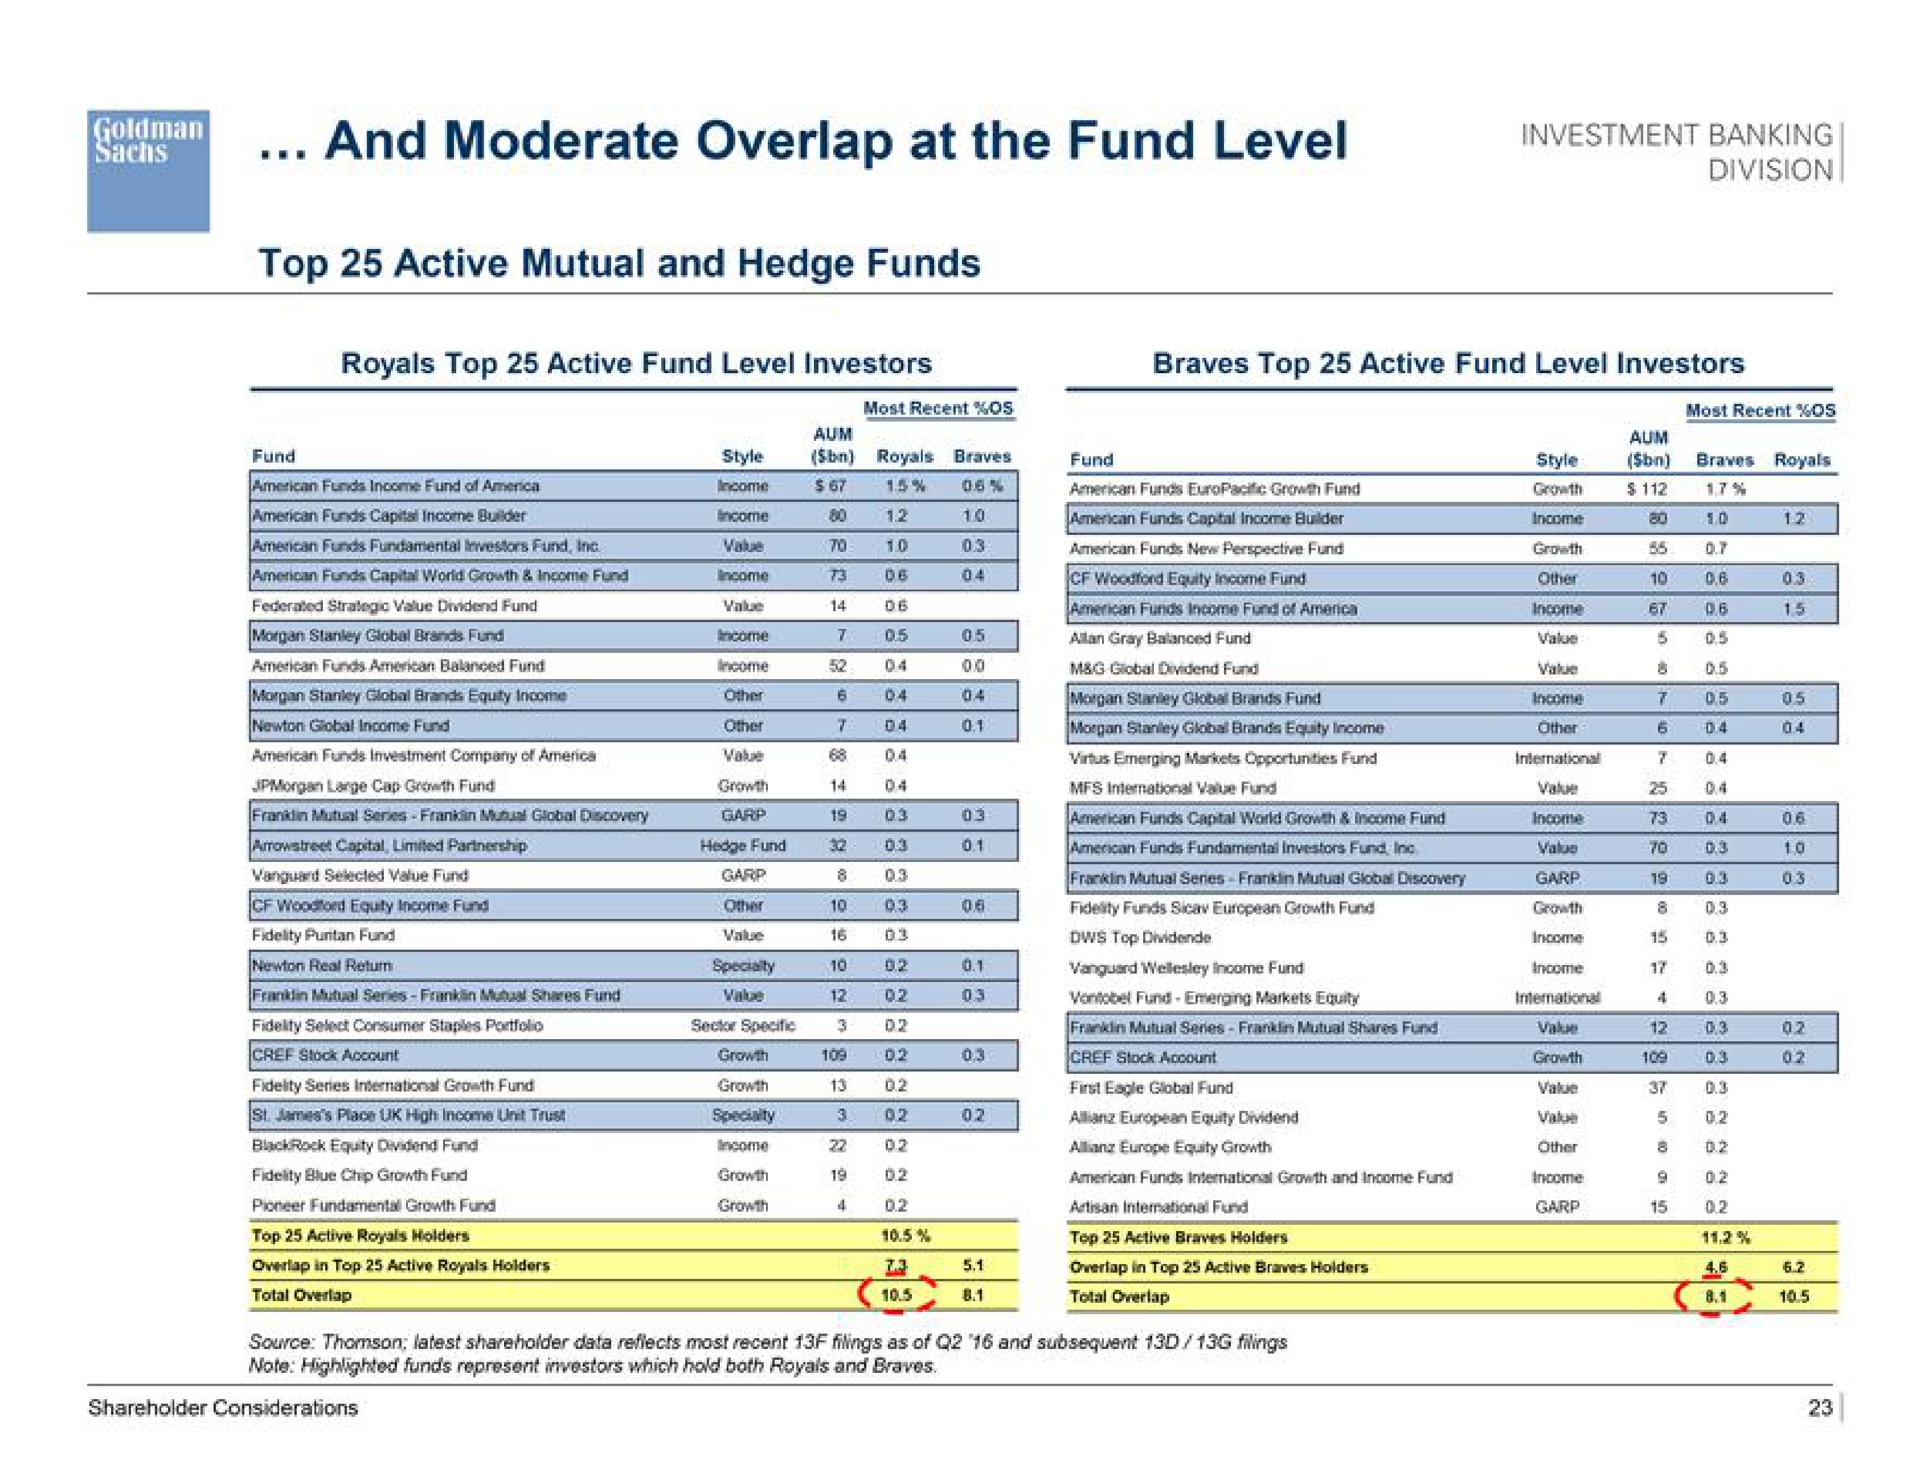 and moderate overlap at the fund level | Goldman Sachs